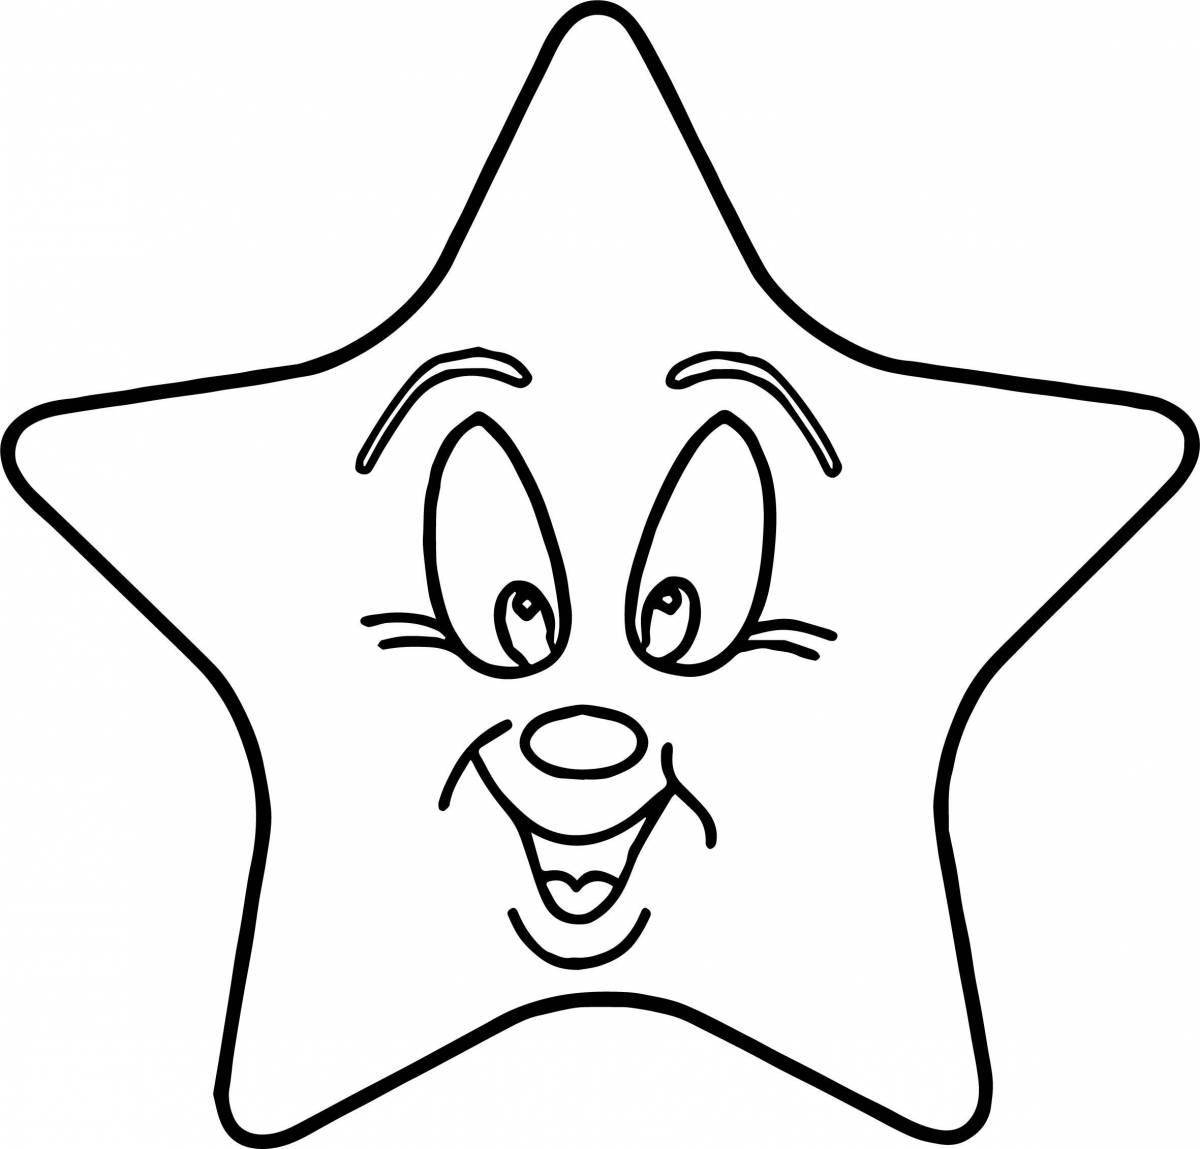 Amazing stars coloring pages for kids